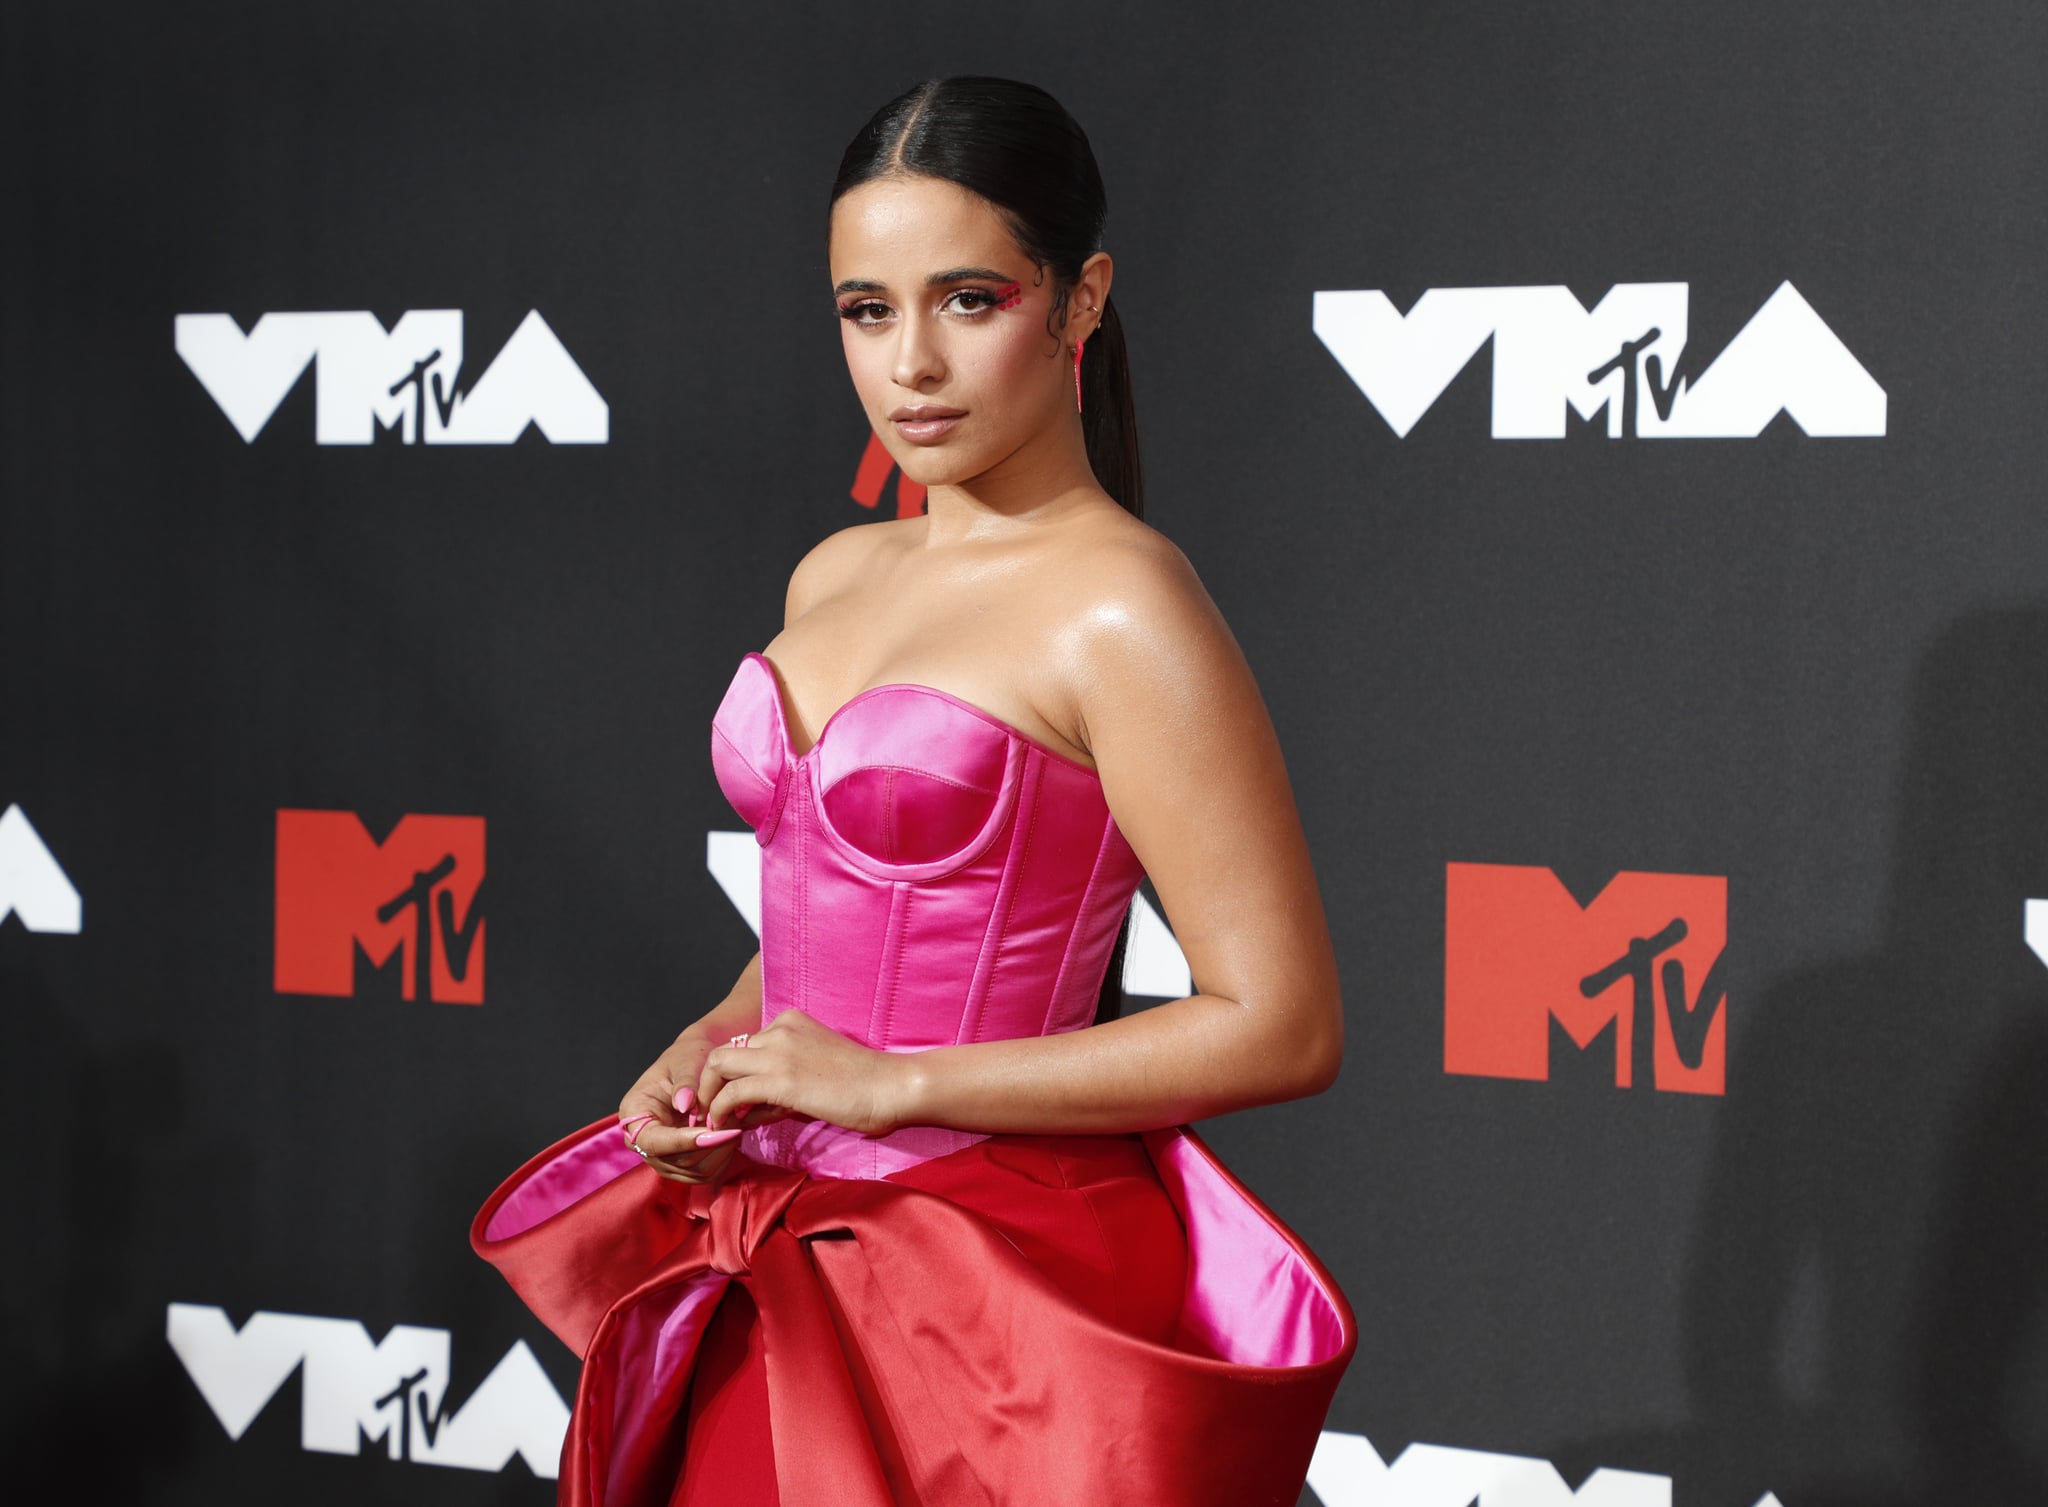 MTV VMAs 2021: See the Best Red Carpet Looks